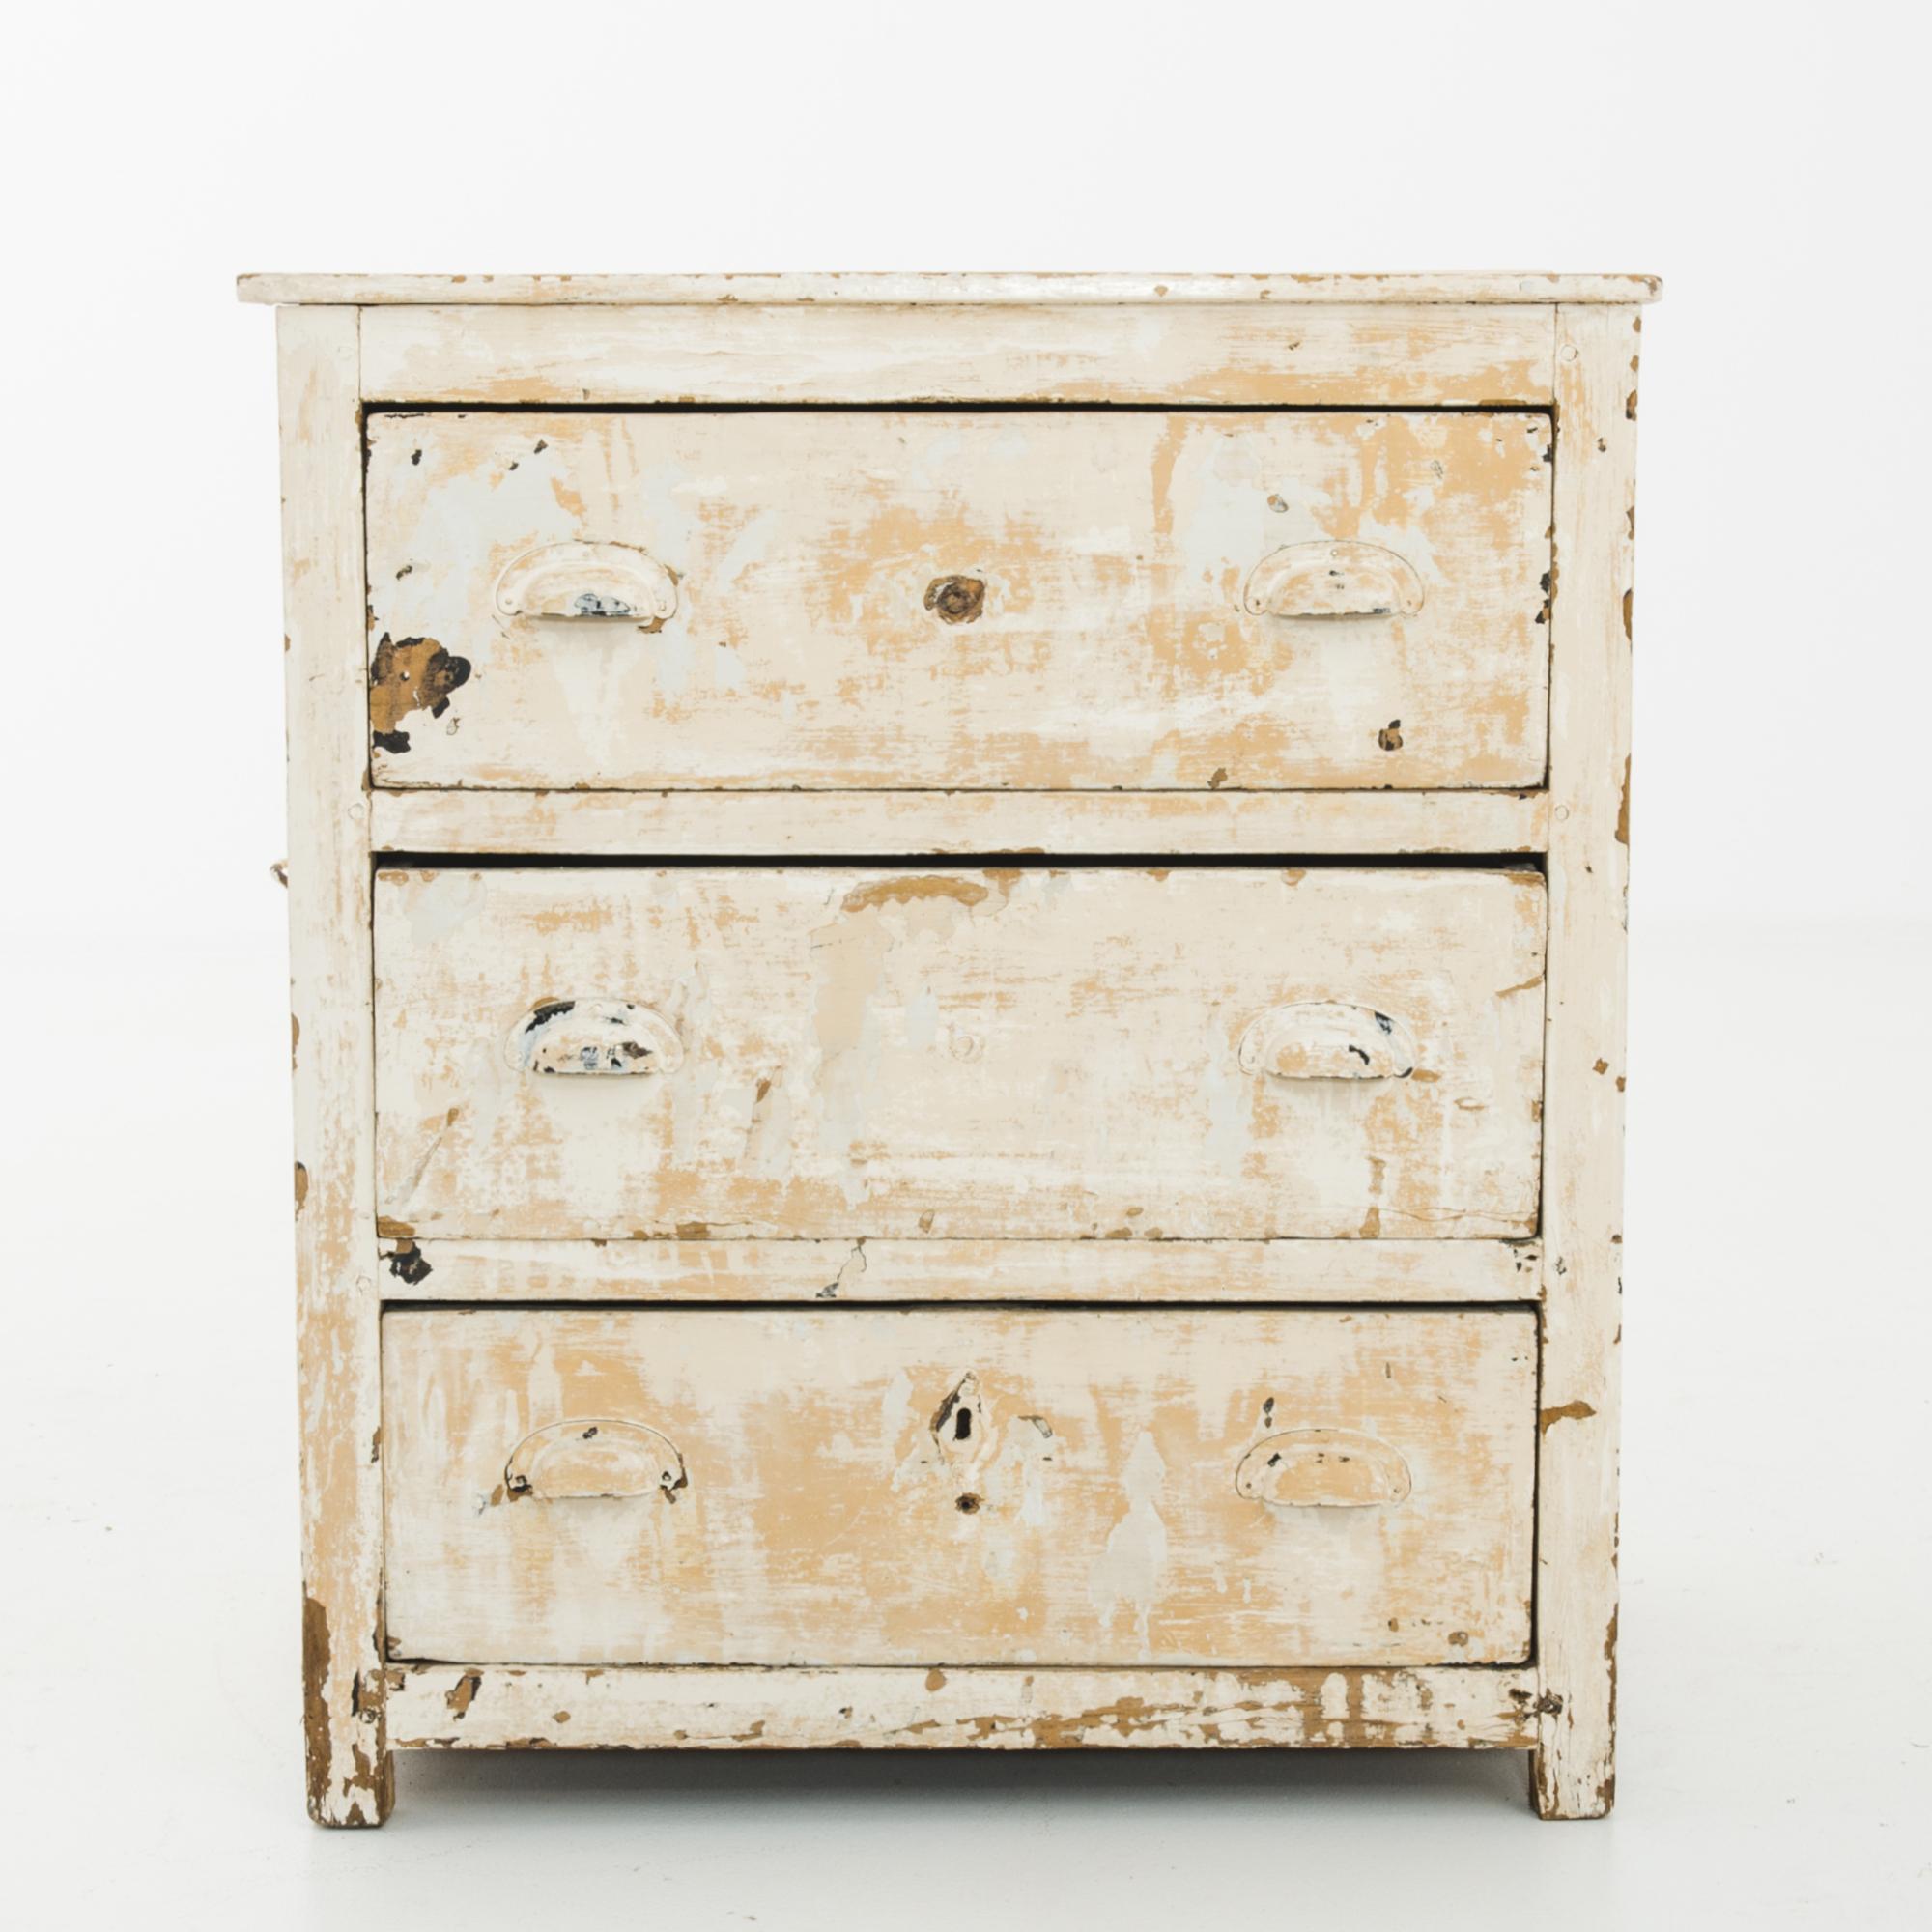 A wooden chest of drawers from France, circa 1900, with a striking patinated finish. The original white paint has weathered with age, revealing a color palette of cream, apricot and natural wood. The deep drawers pull out with cup handles; drop